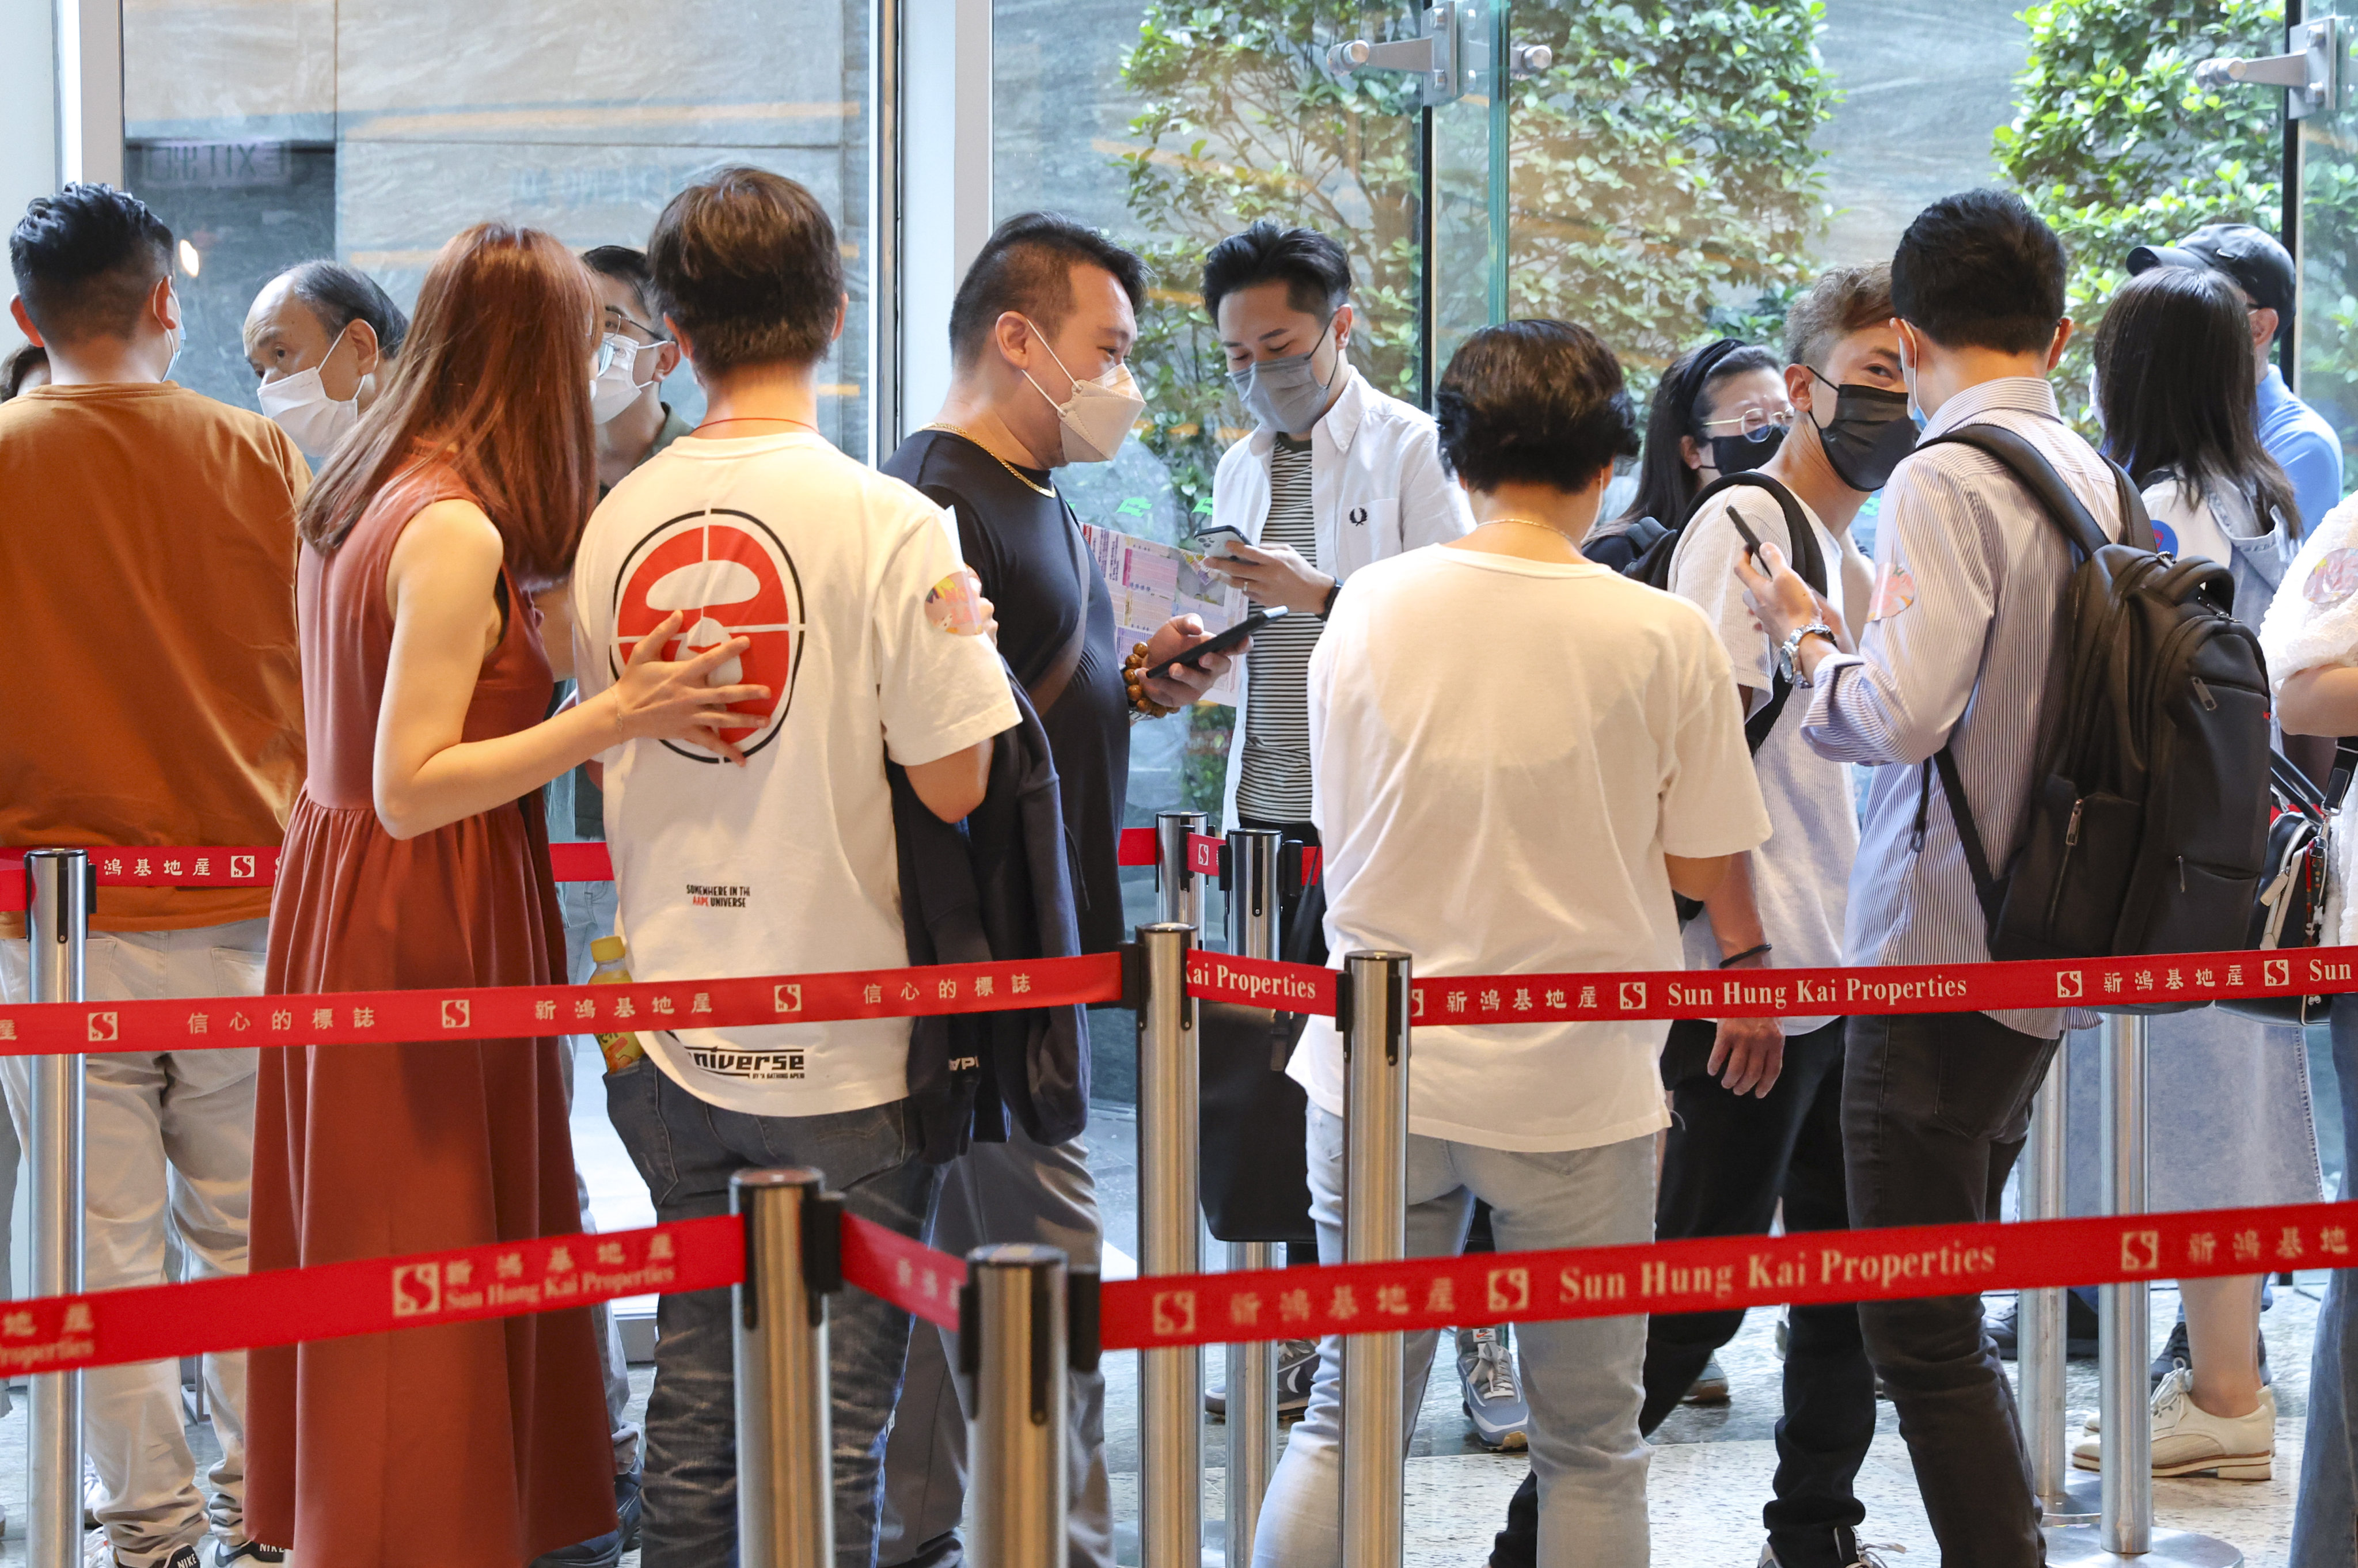 Potential buyers queue up at the sales office of Sun Hung Kai Properties’ Novo Land Phase 1 development at the International Commerce Centre in West Kowloon on July 30, 2022. Photo: Edmond So